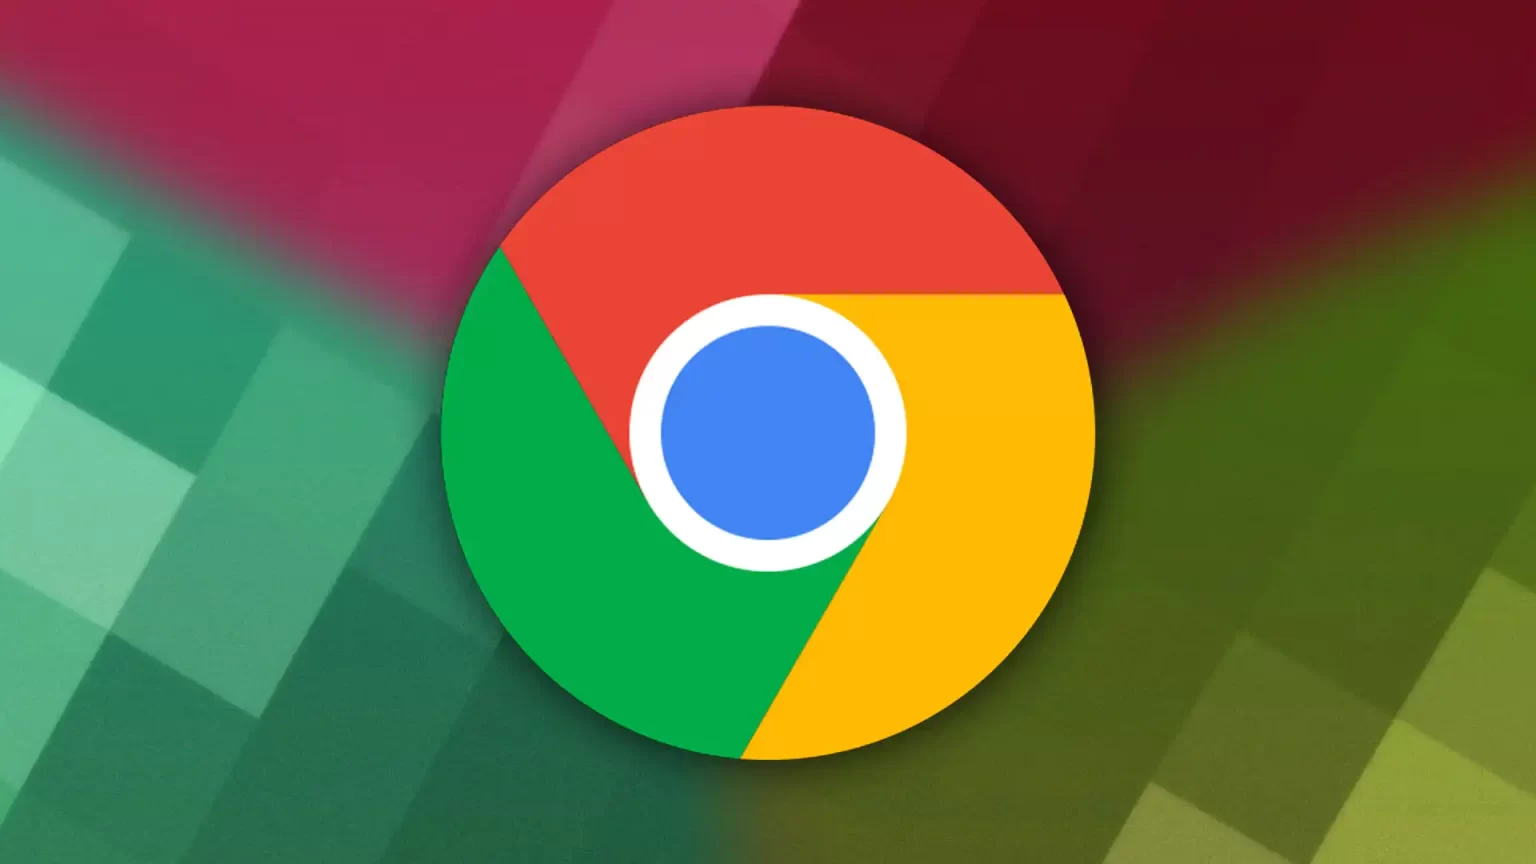 How To Change The Background Of The Google Chrome Browser?